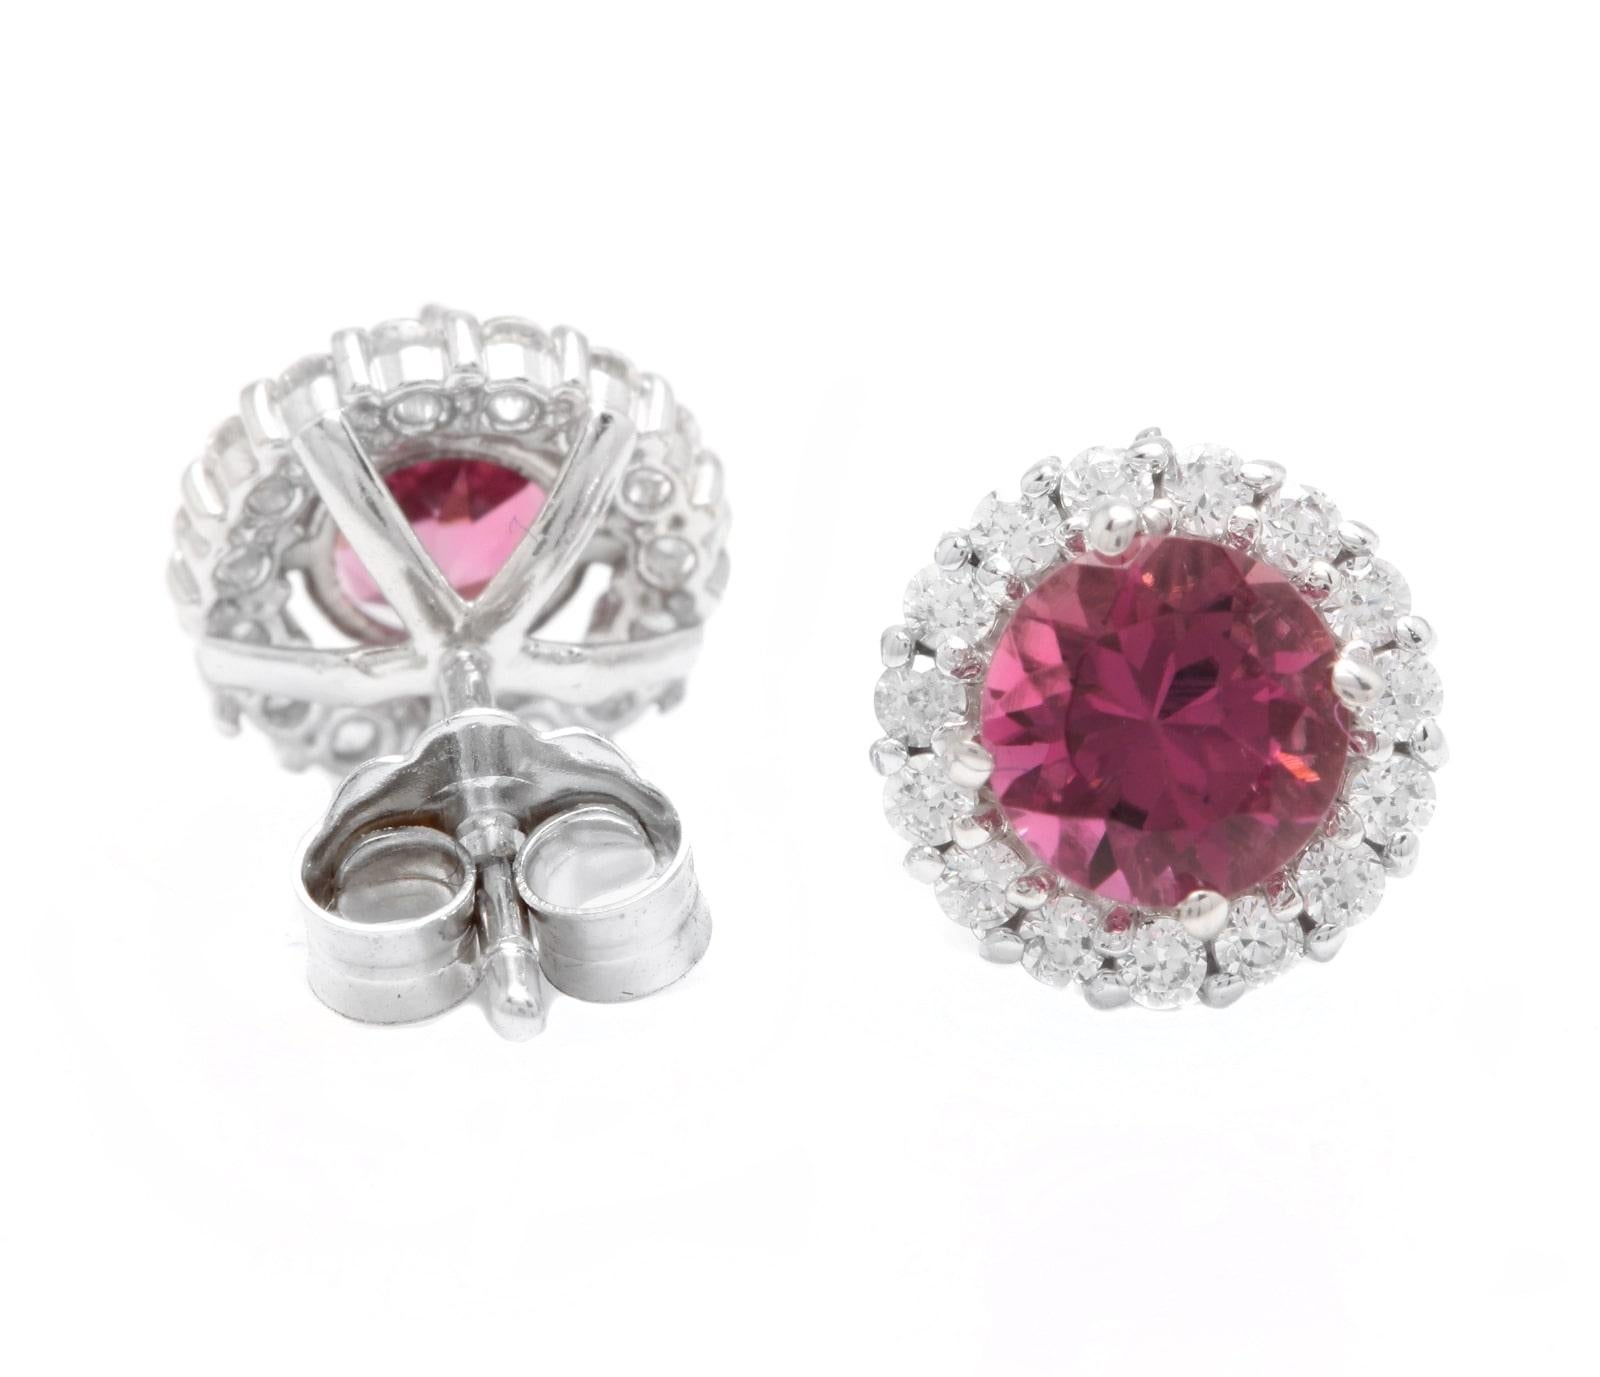 Exquisite 1.65 Carats Natural Tourmaline and Diamond 14K Solid White Gold Stud Earrings

Amazing looking piece! 

Suggested Replacement Value$3,200.00

Total Natural Round Cut White Diamonds Weight: 0.45 Carats (color G-H / Clarity SI1-SI2)

Total